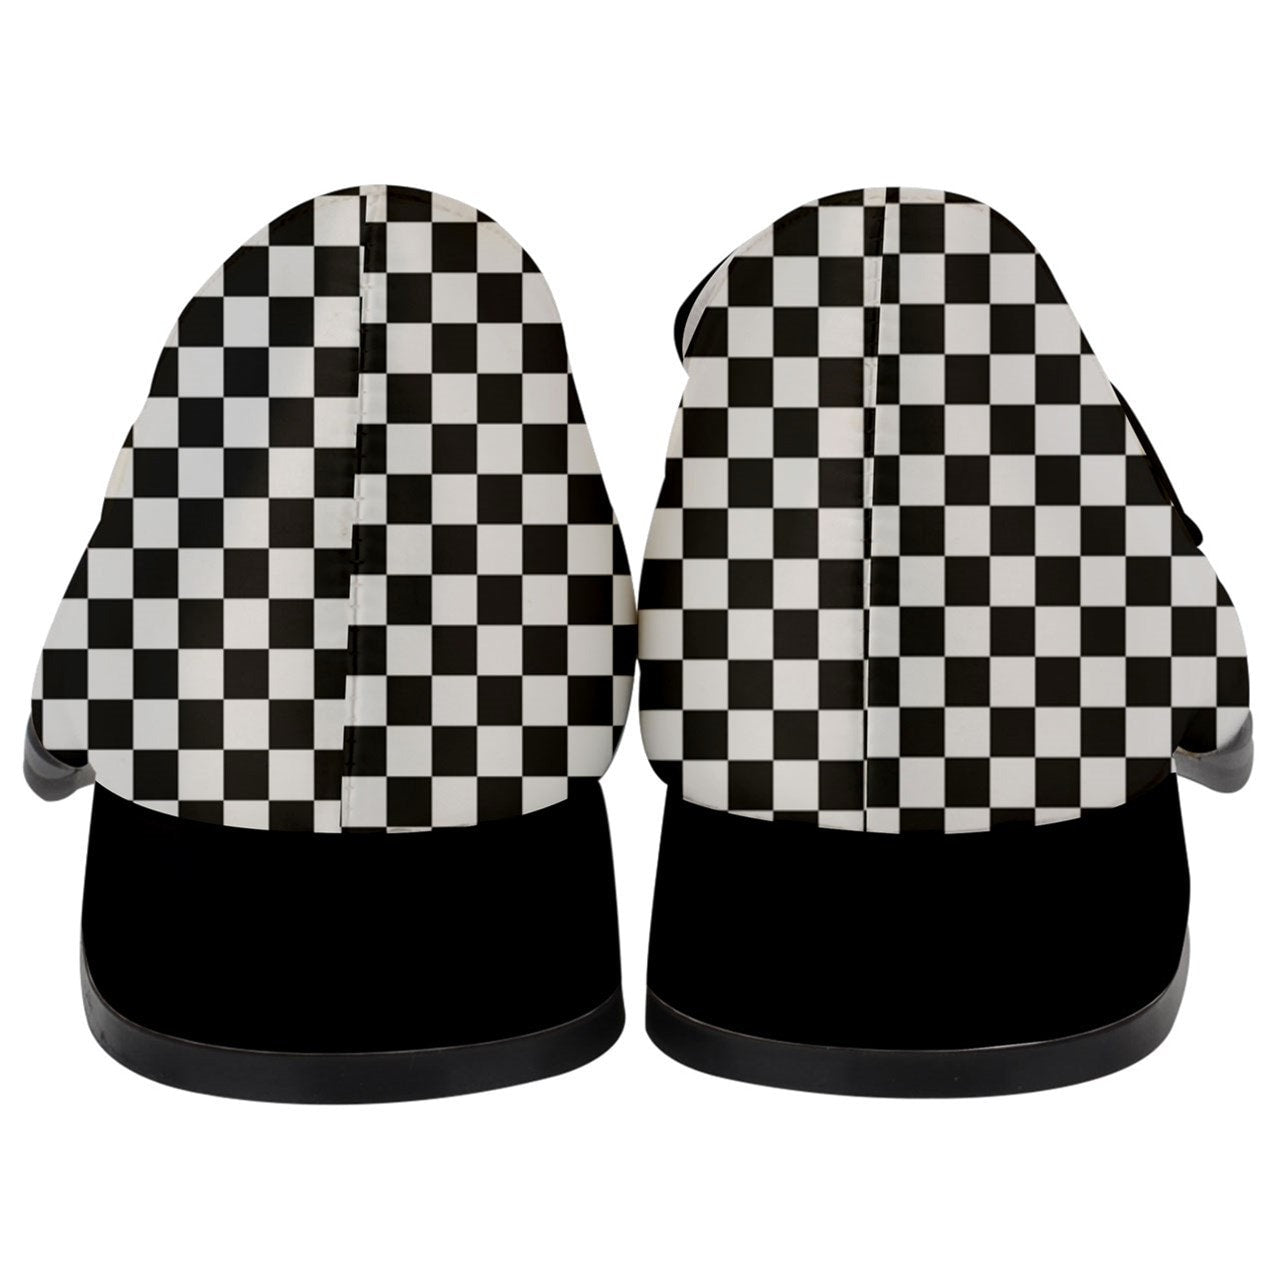 Women's Loafers, Checker Loafers,Black and White Loafers,Loafers Women,Checker Shoes,Loafers Vintage Style,Unique Loafers,Chunky Heels Women